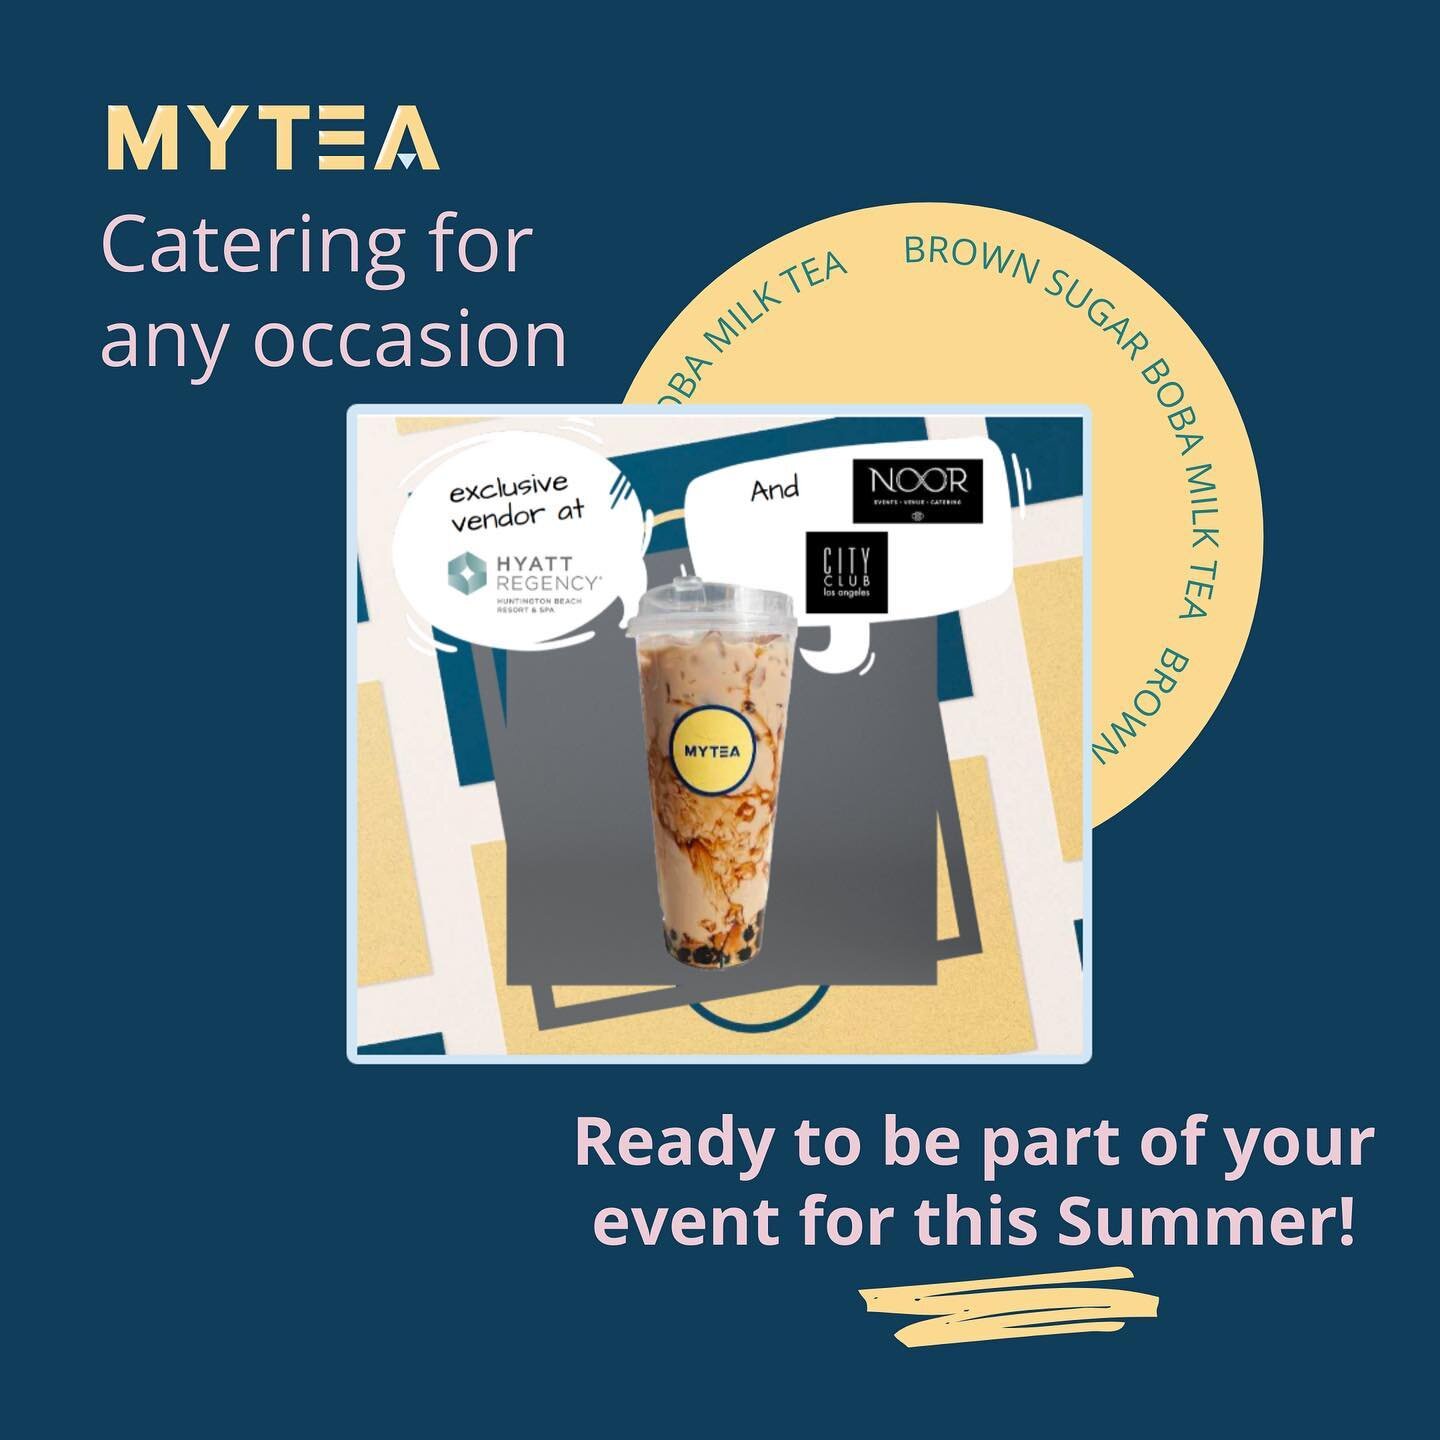 MYTEA catering 🔵🟡🧋offering grab and go service for this hot 😎summer!  Please DM for details 🥰

We welcome small and large parties, gatherings, business events. Mytea is ready to be part of your event for this summer. 🧋⛱️☀️

#boba #bubbletea #bo